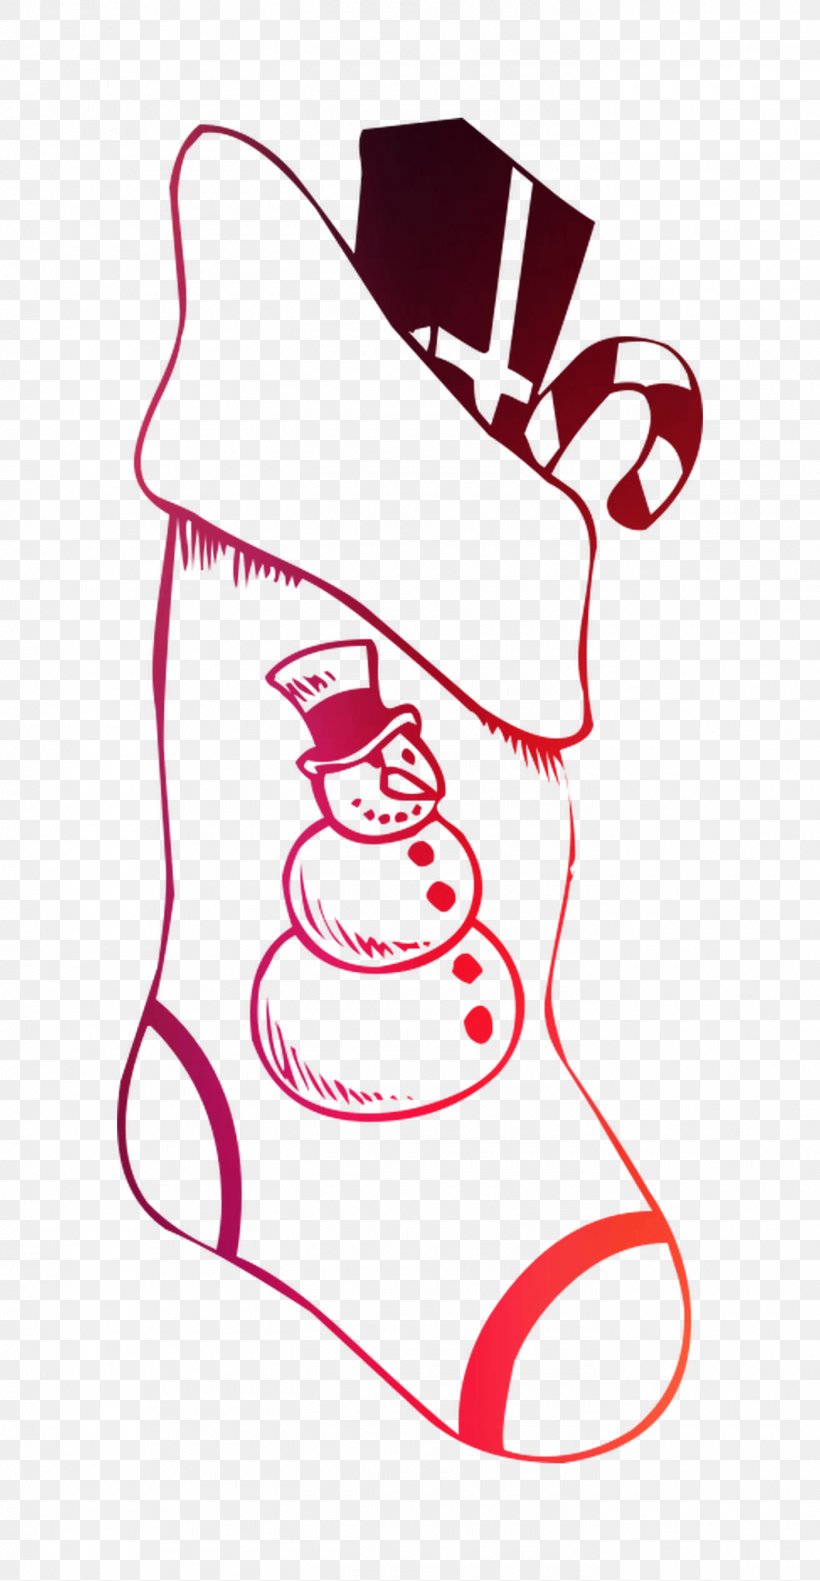 Drawing Christmas Day Illustration Clip Art Santa Claus, PNG, 1400x2700px, Drawing, Christmas Day, Christmas Stockings, Christmas Tree, Coloring Book Download Free